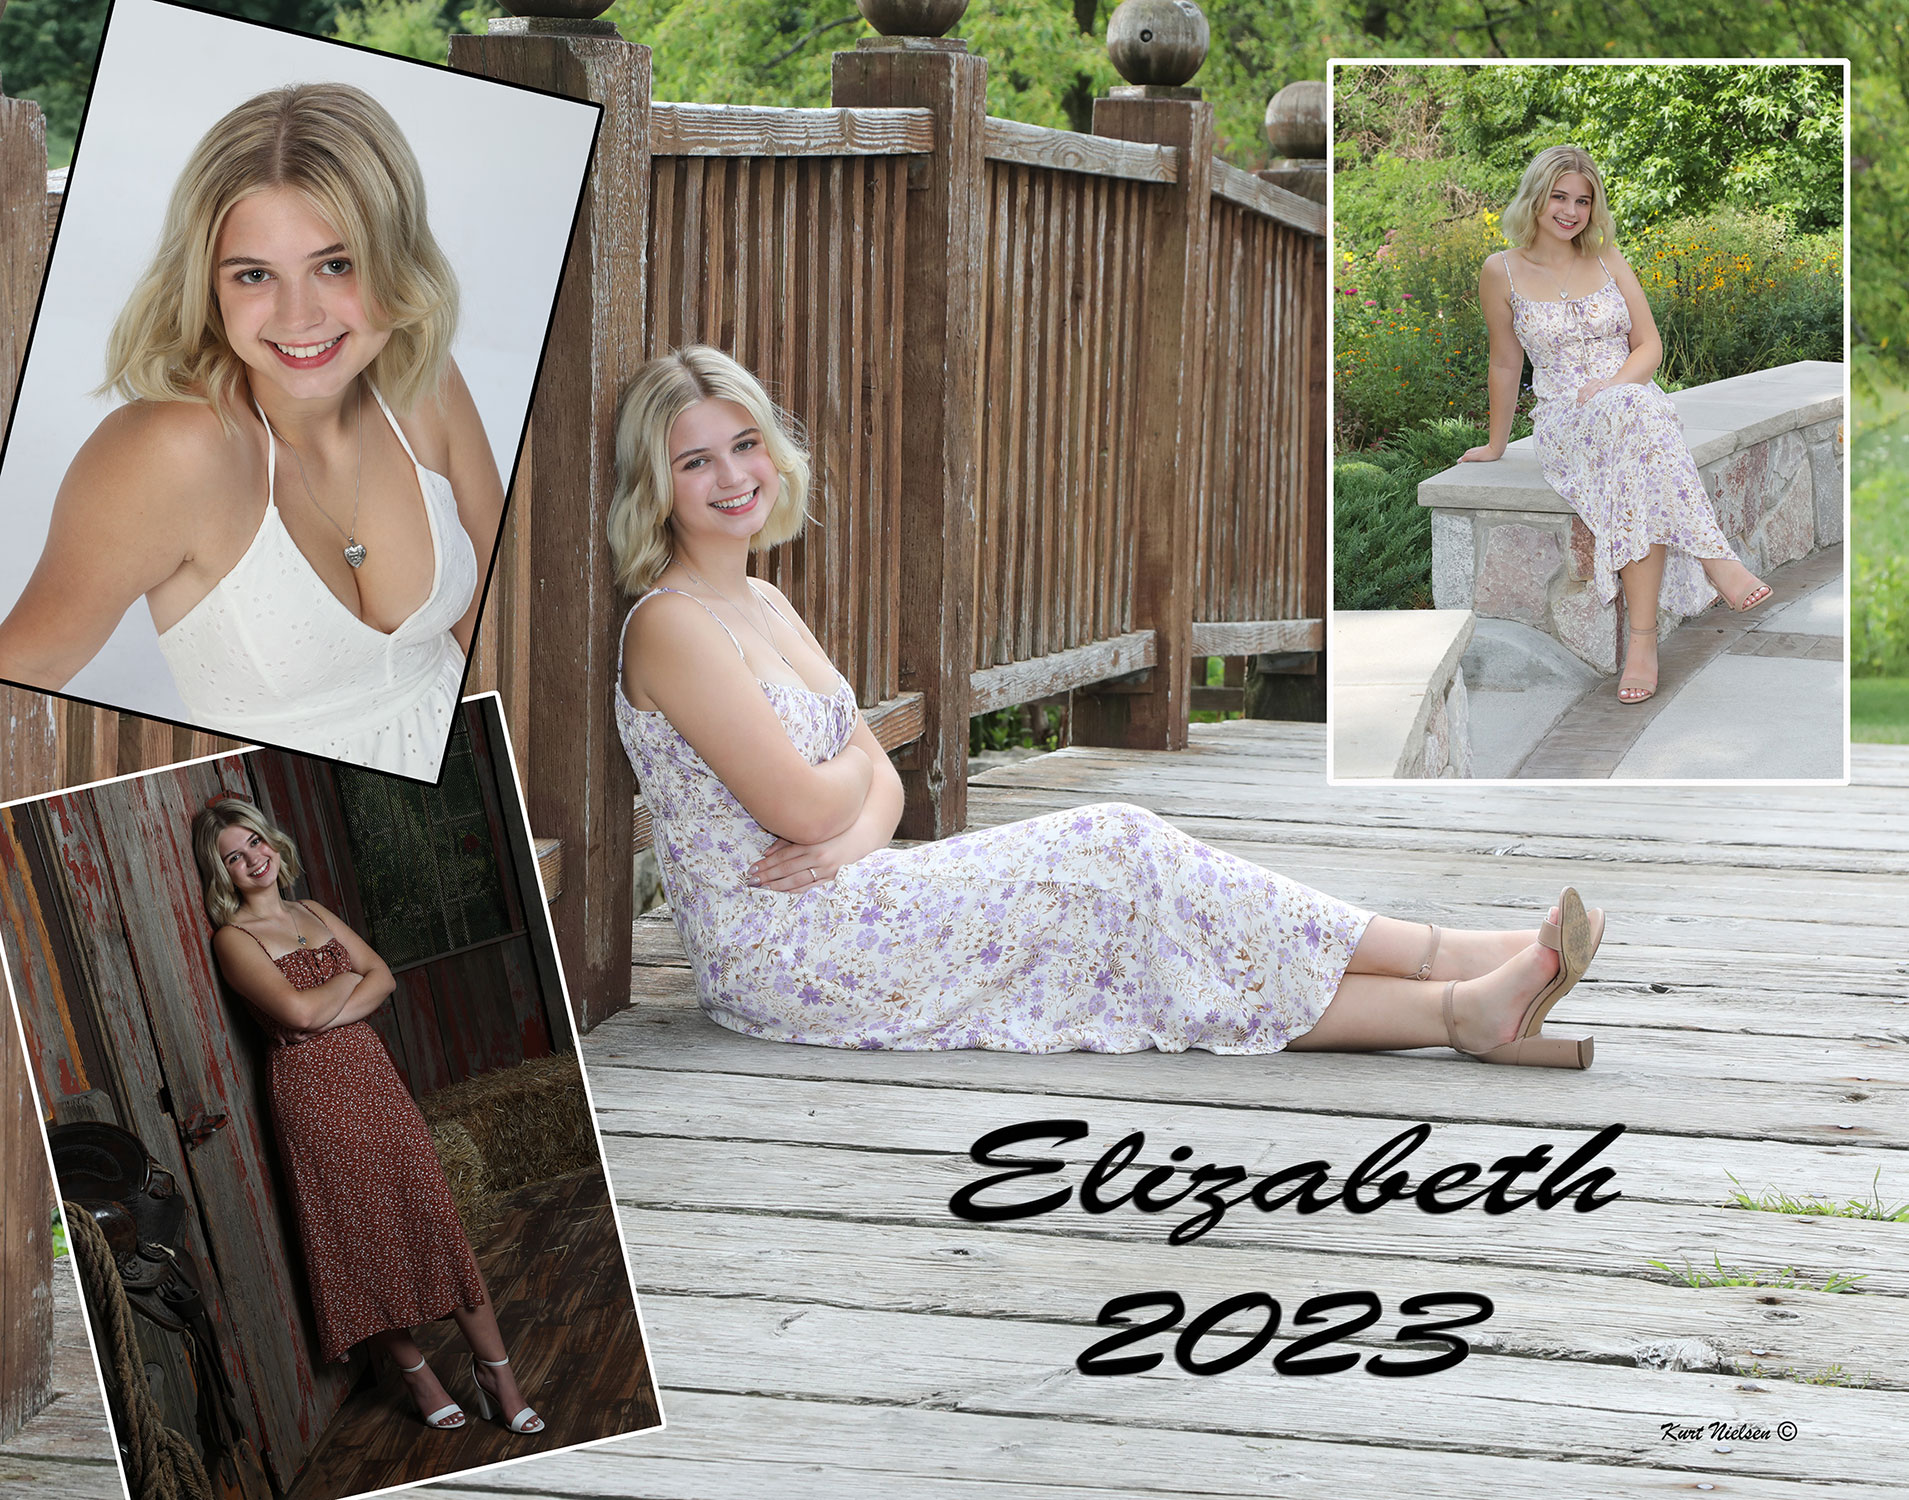 Local Senior Photographer that specializes in artistic photography